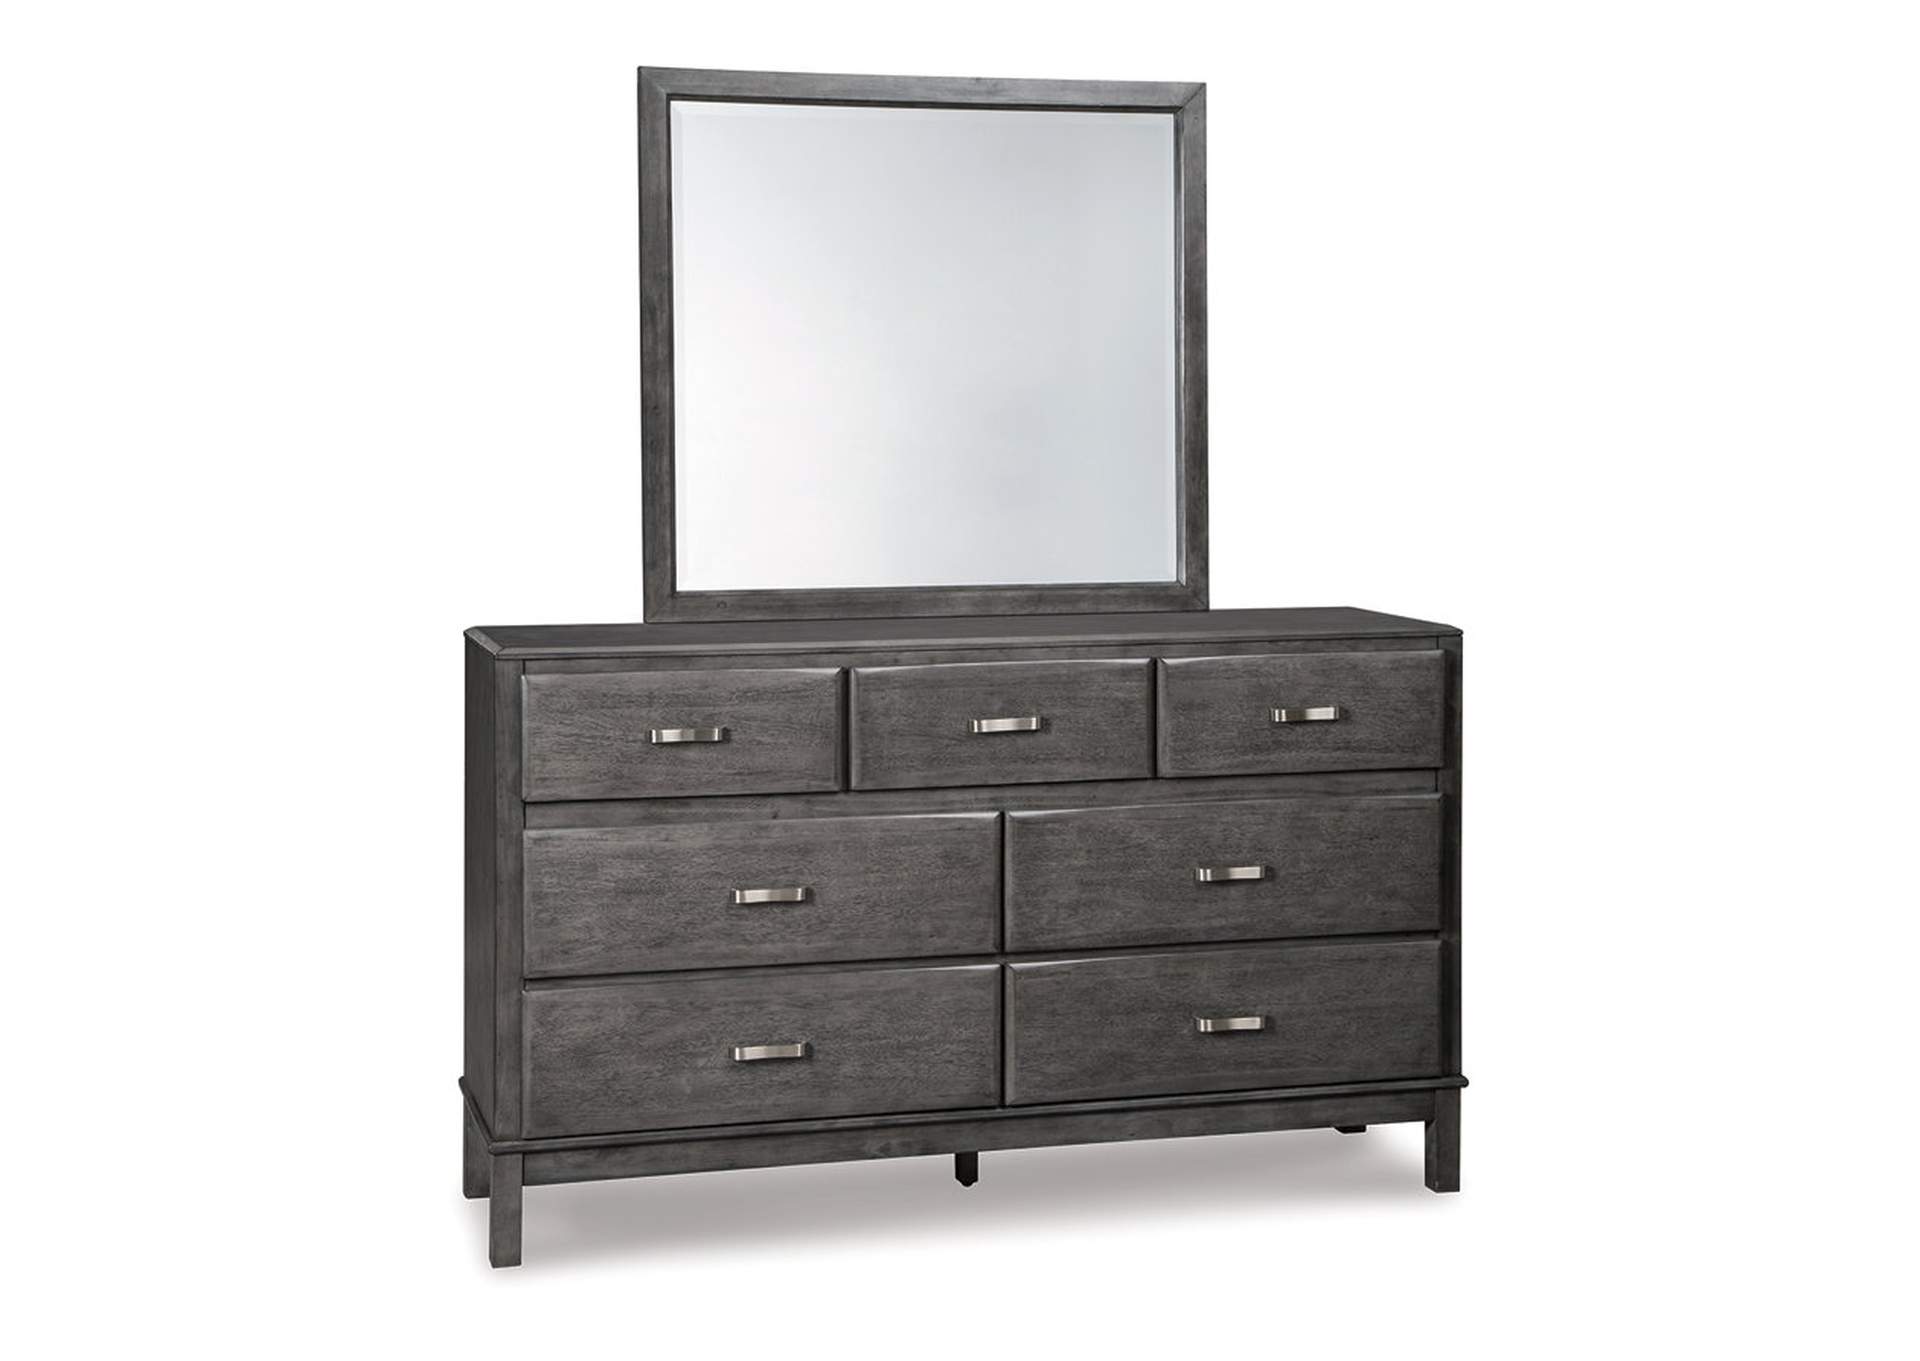 Caitbrook California King Storage Bed with 8 Storage Drawers with Mirrored Dresser and 2 Nightstands,Signature Design By Ashley